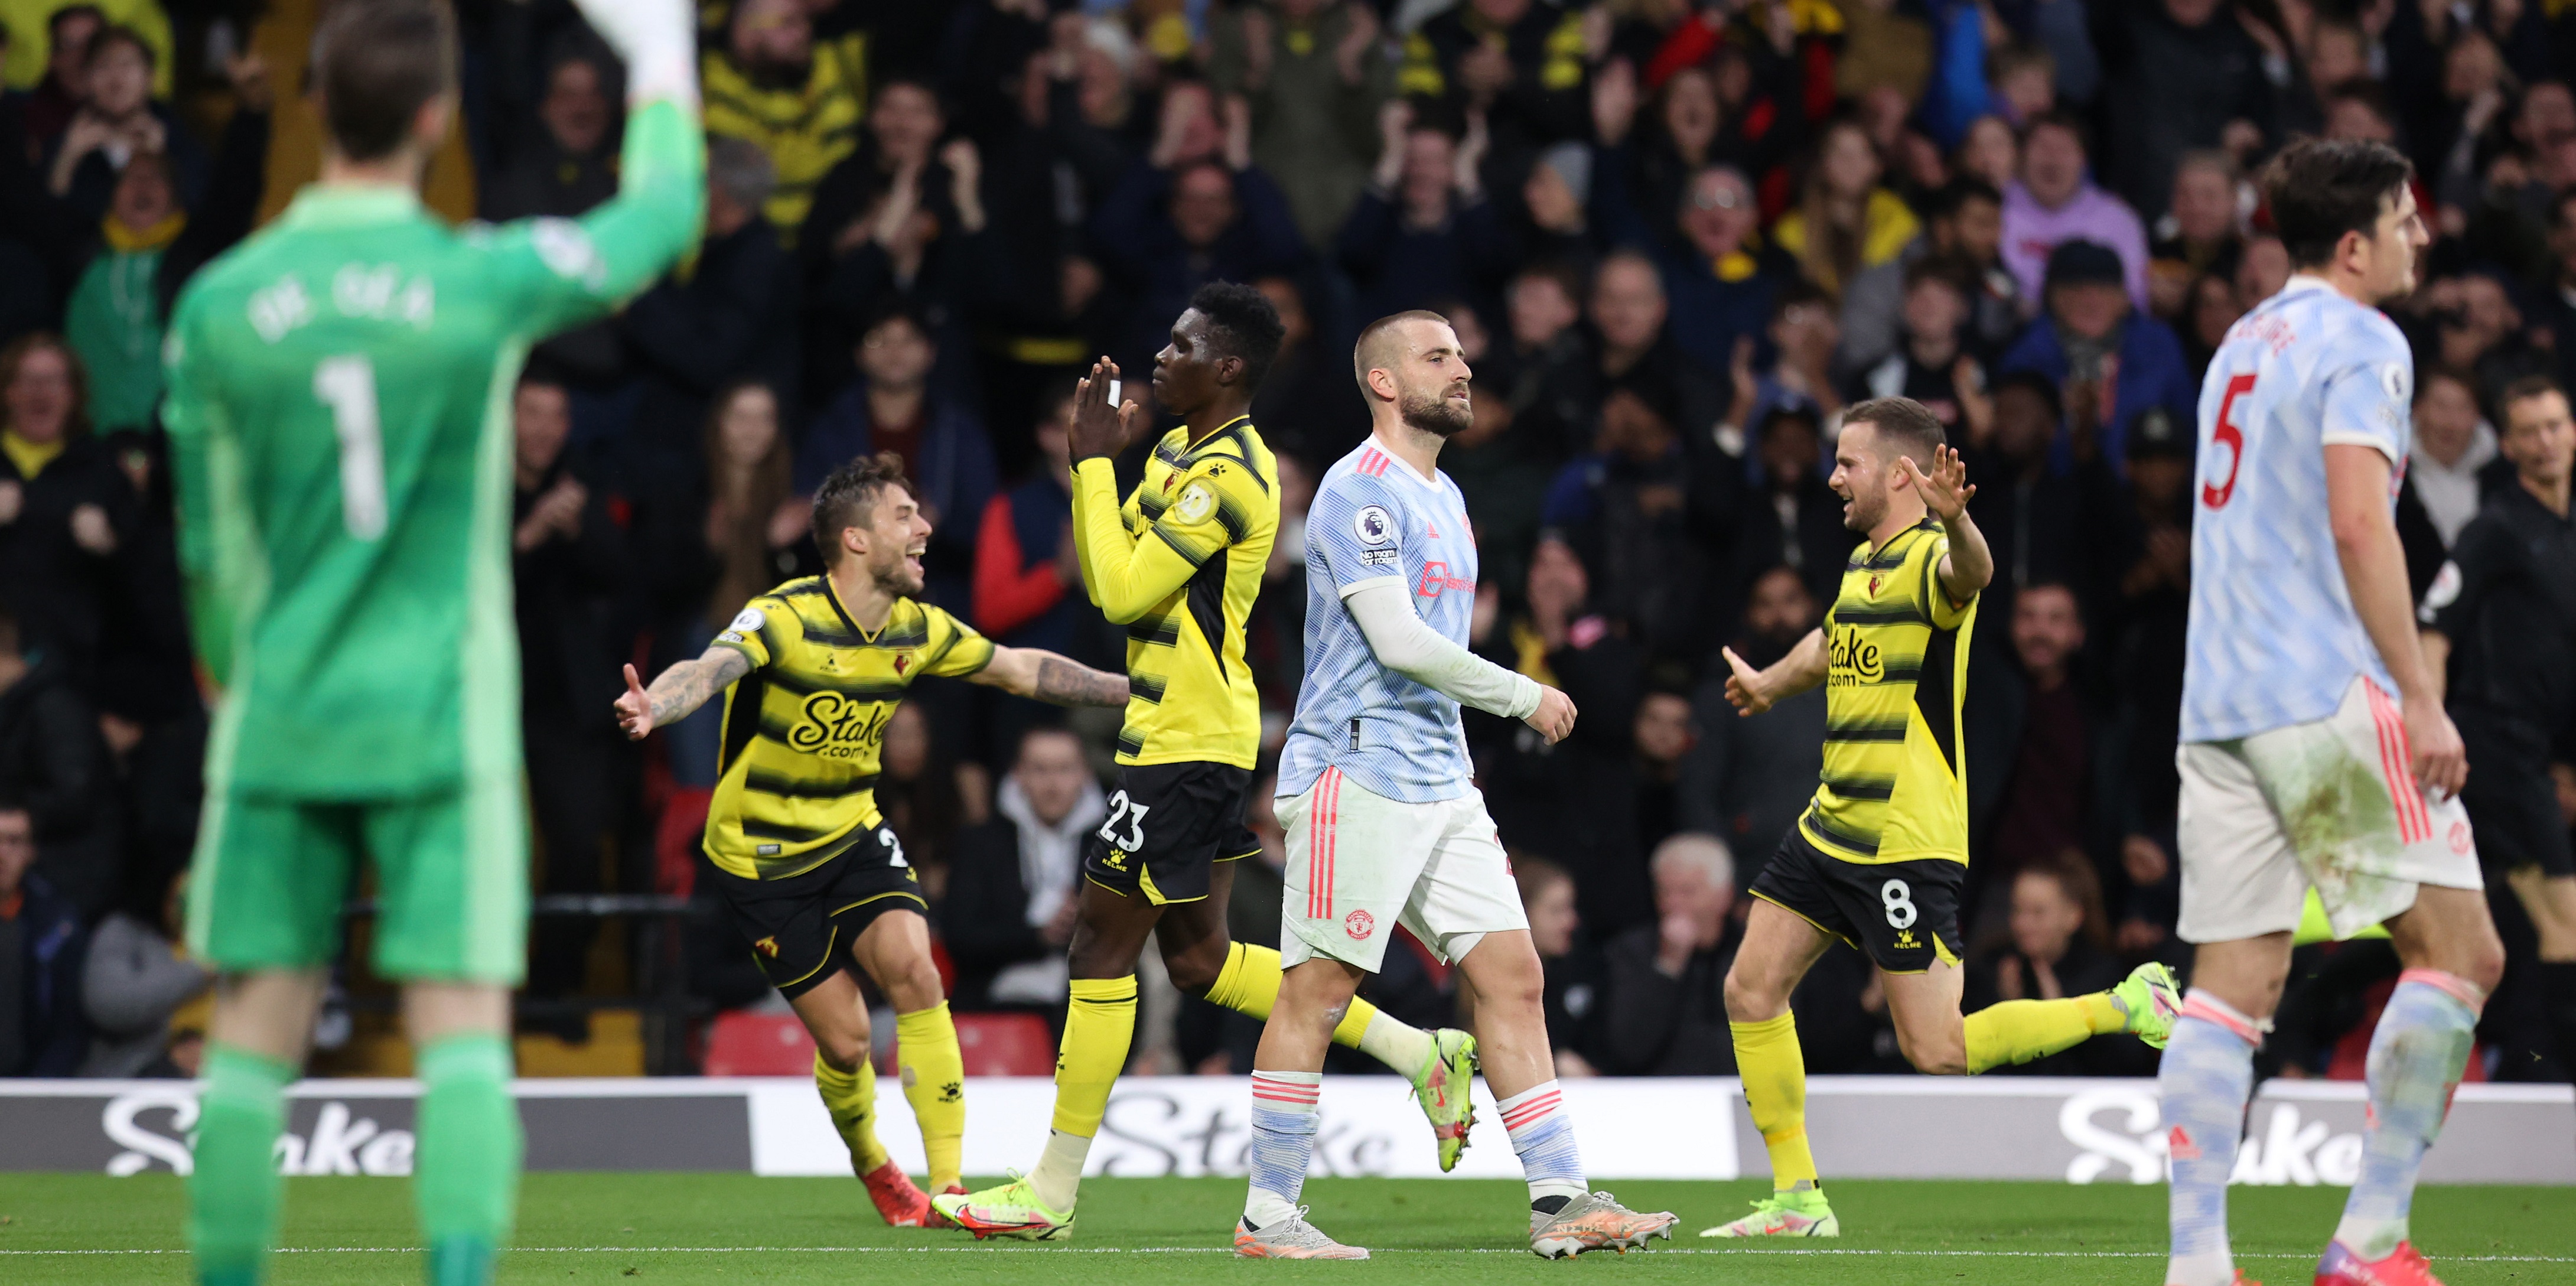 Relegation-threatened outfit’s 24-year-old attacker tops Klopp’s wishlist to help replace expiring Liverpool front-three – Fichajes